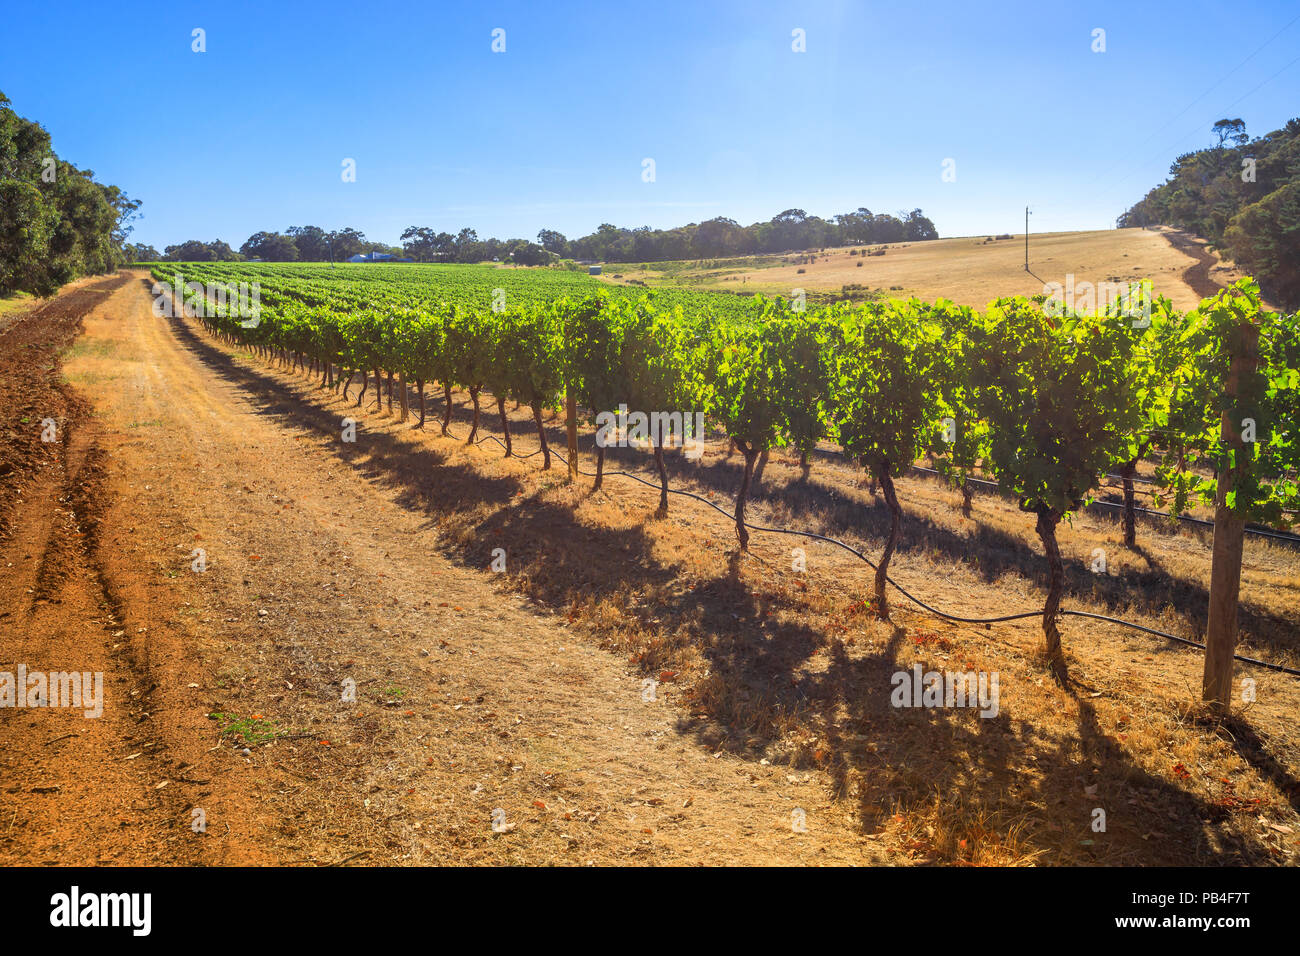 Rows of white grapes in one of many vineyards. Margaret River is a Wine Region in Western Australia, popular for wine tasting tours. Copy space. Daylight. Stock Photo